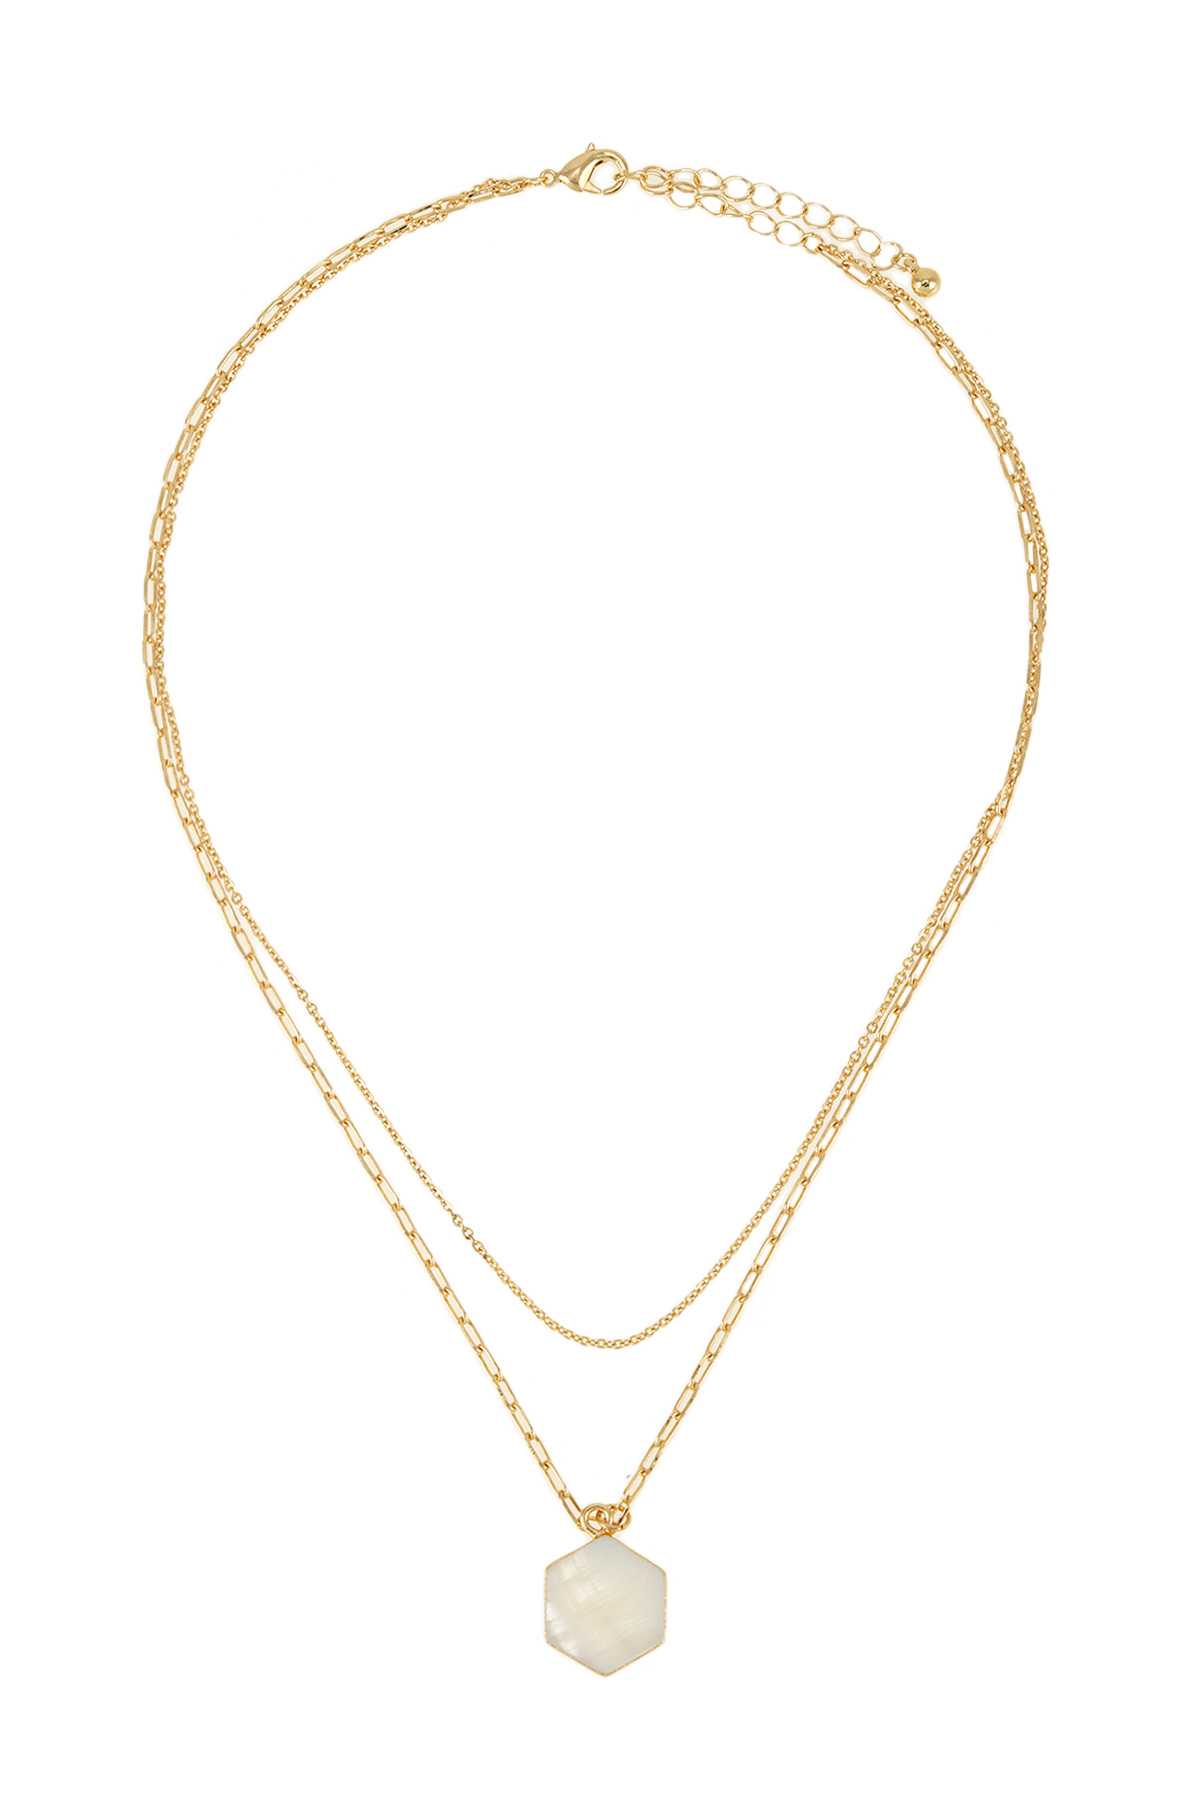 Hexagon Pendent Layered Chain Necklace.jpg